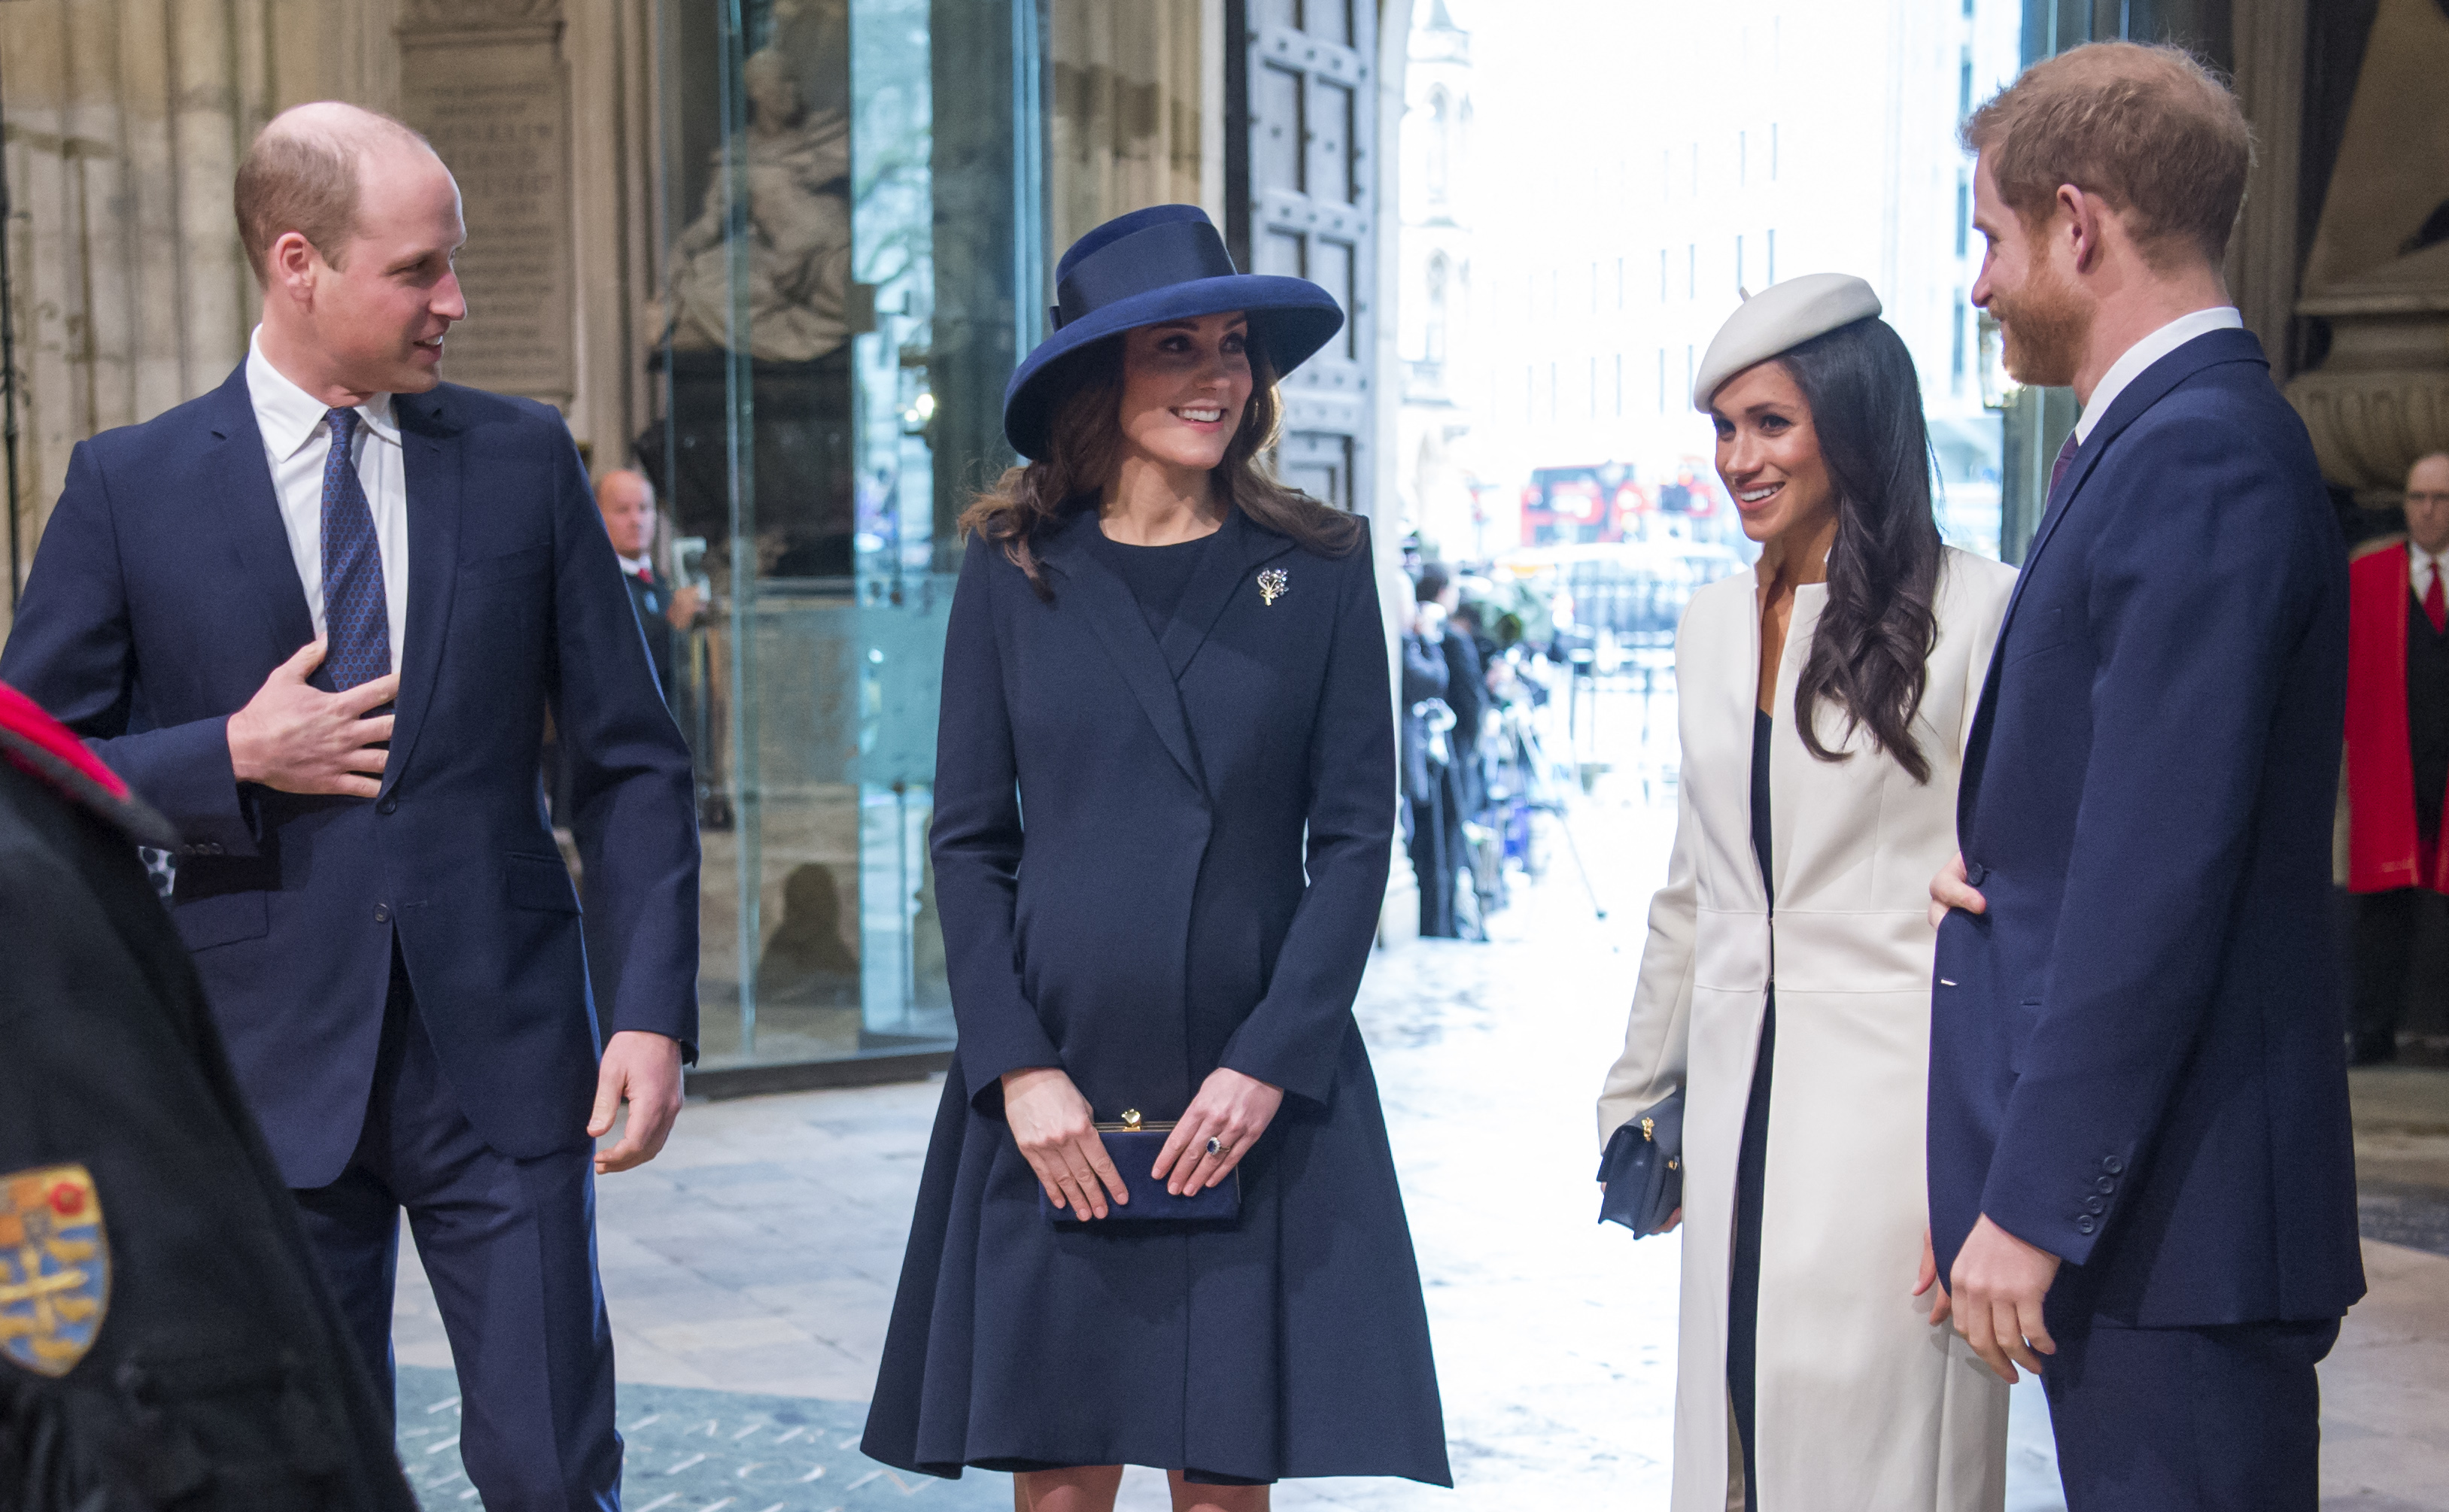 Meghan Markle, Prince Harry, Kate Middleton, and Prince William attend a Commonwealth Day Service in 2018